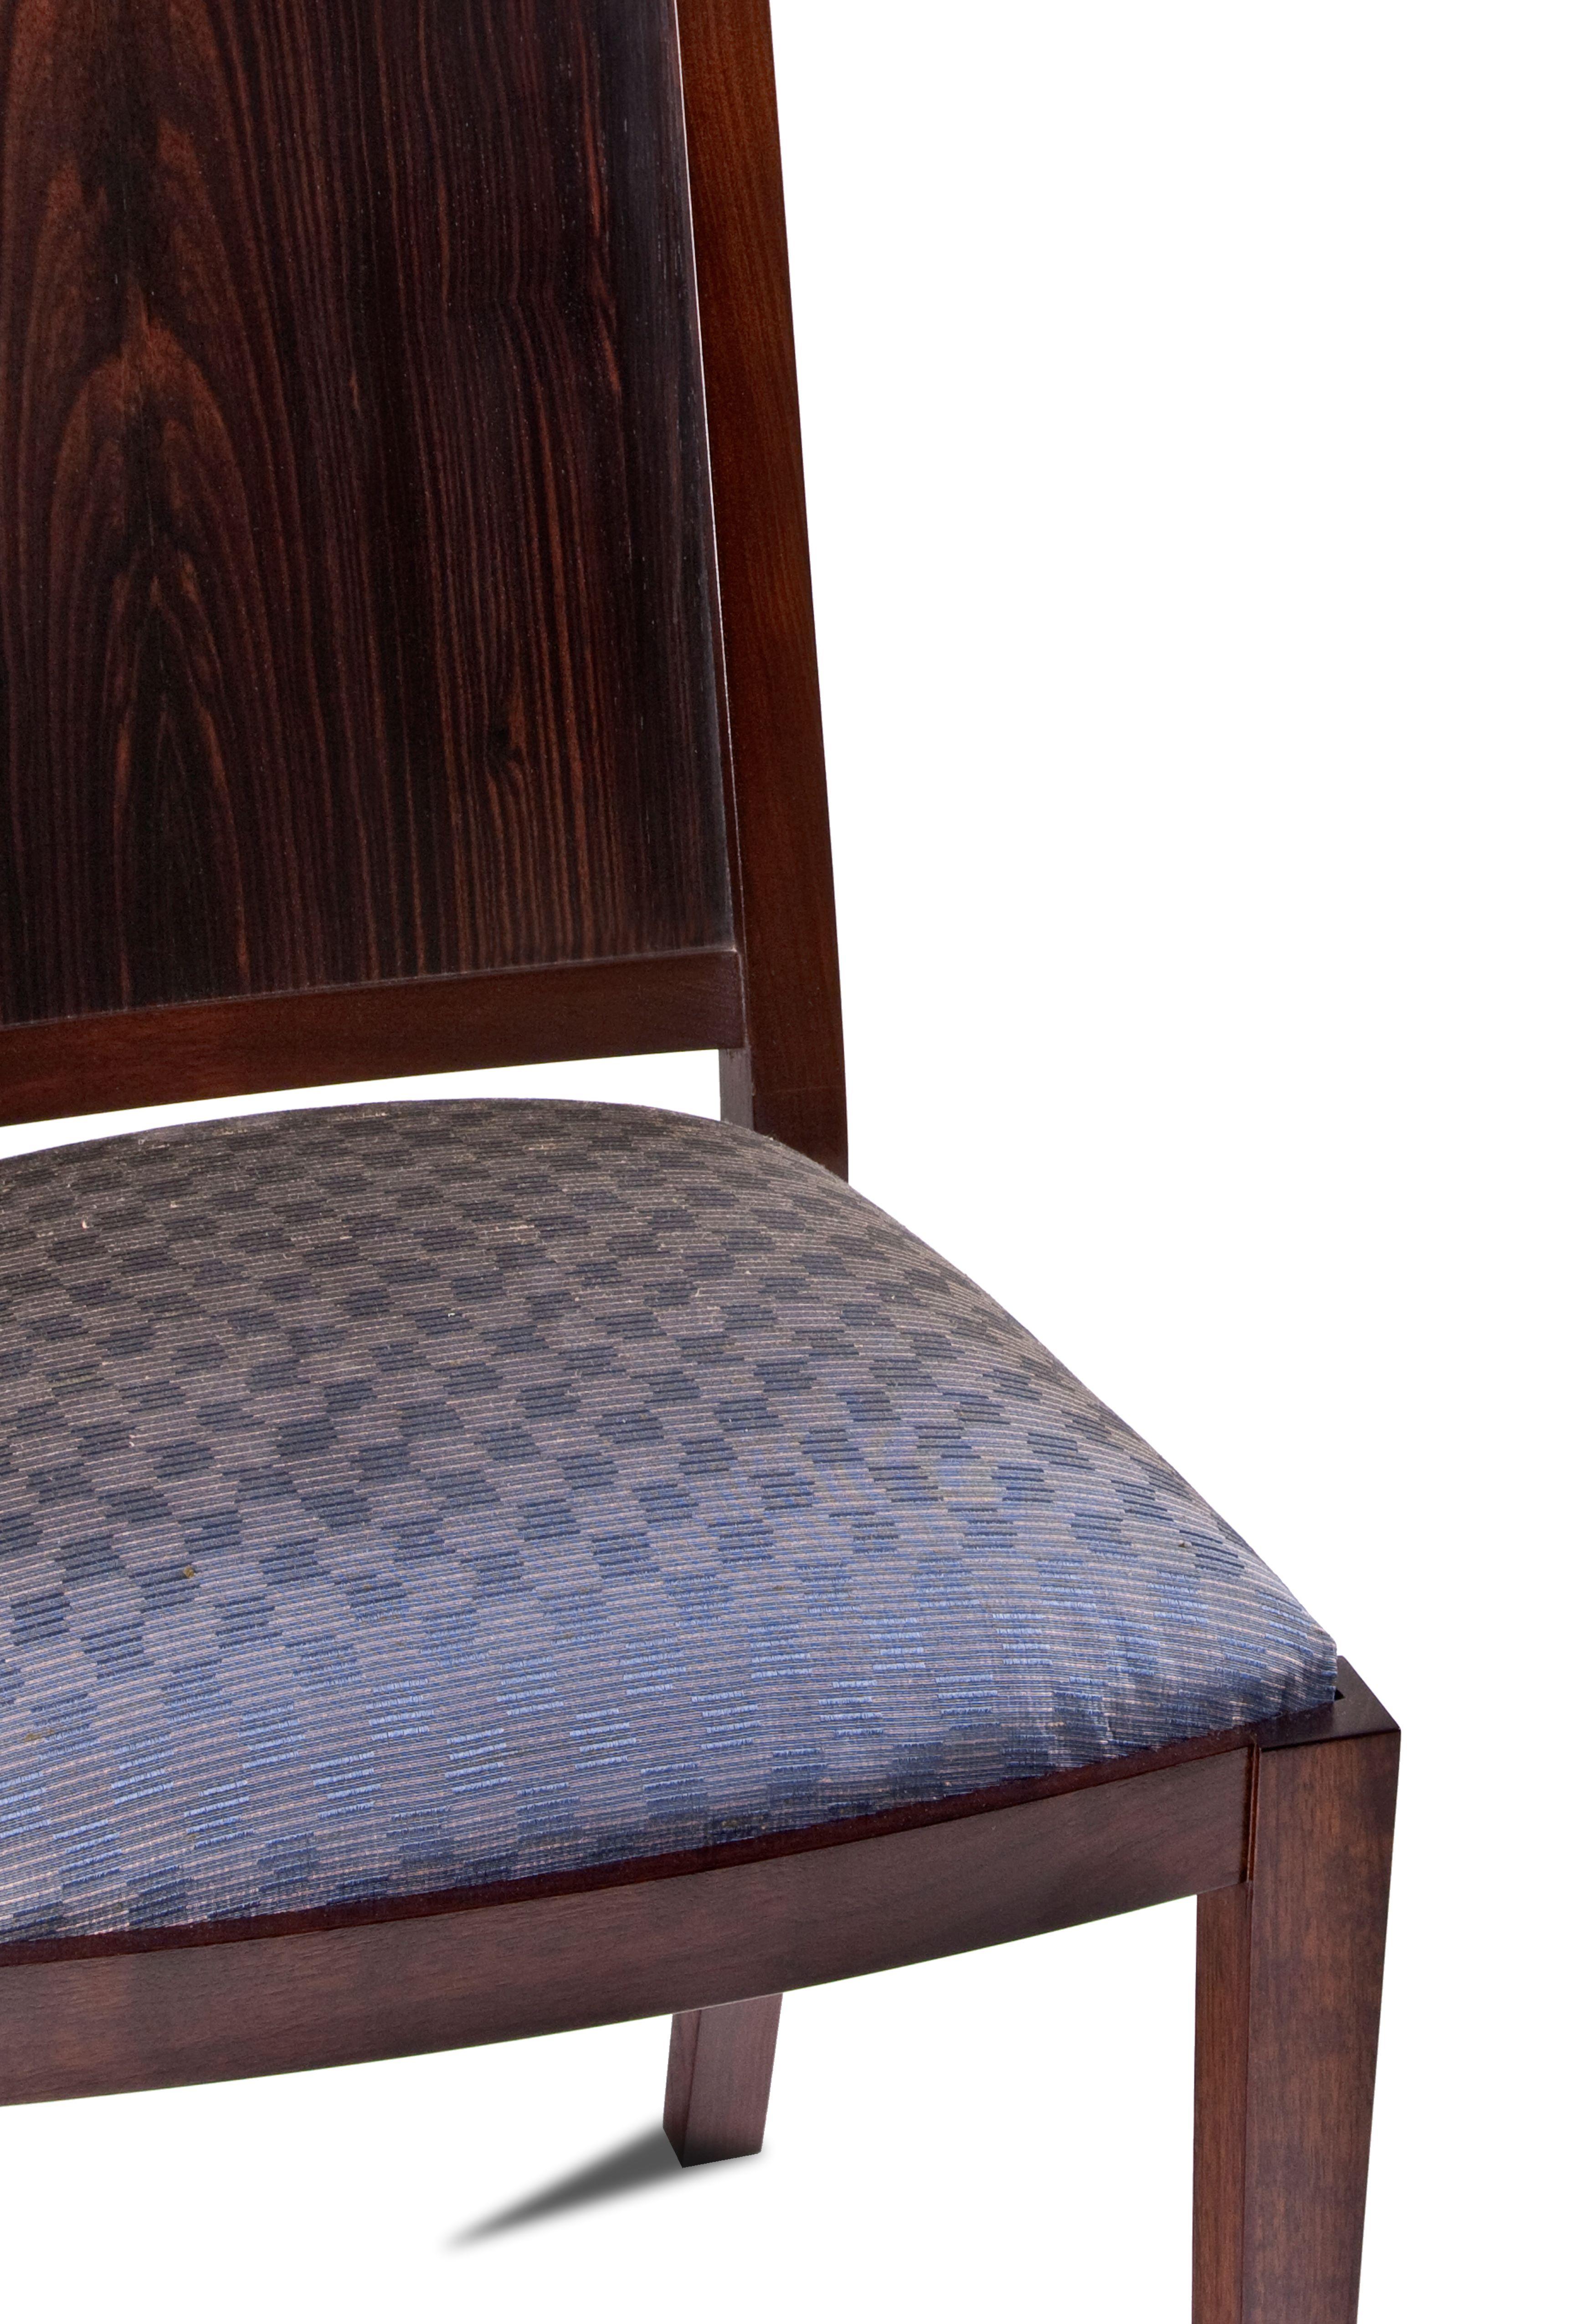 American Craftsman Macassar Ebony and Walnut Dining Chairs For Sale